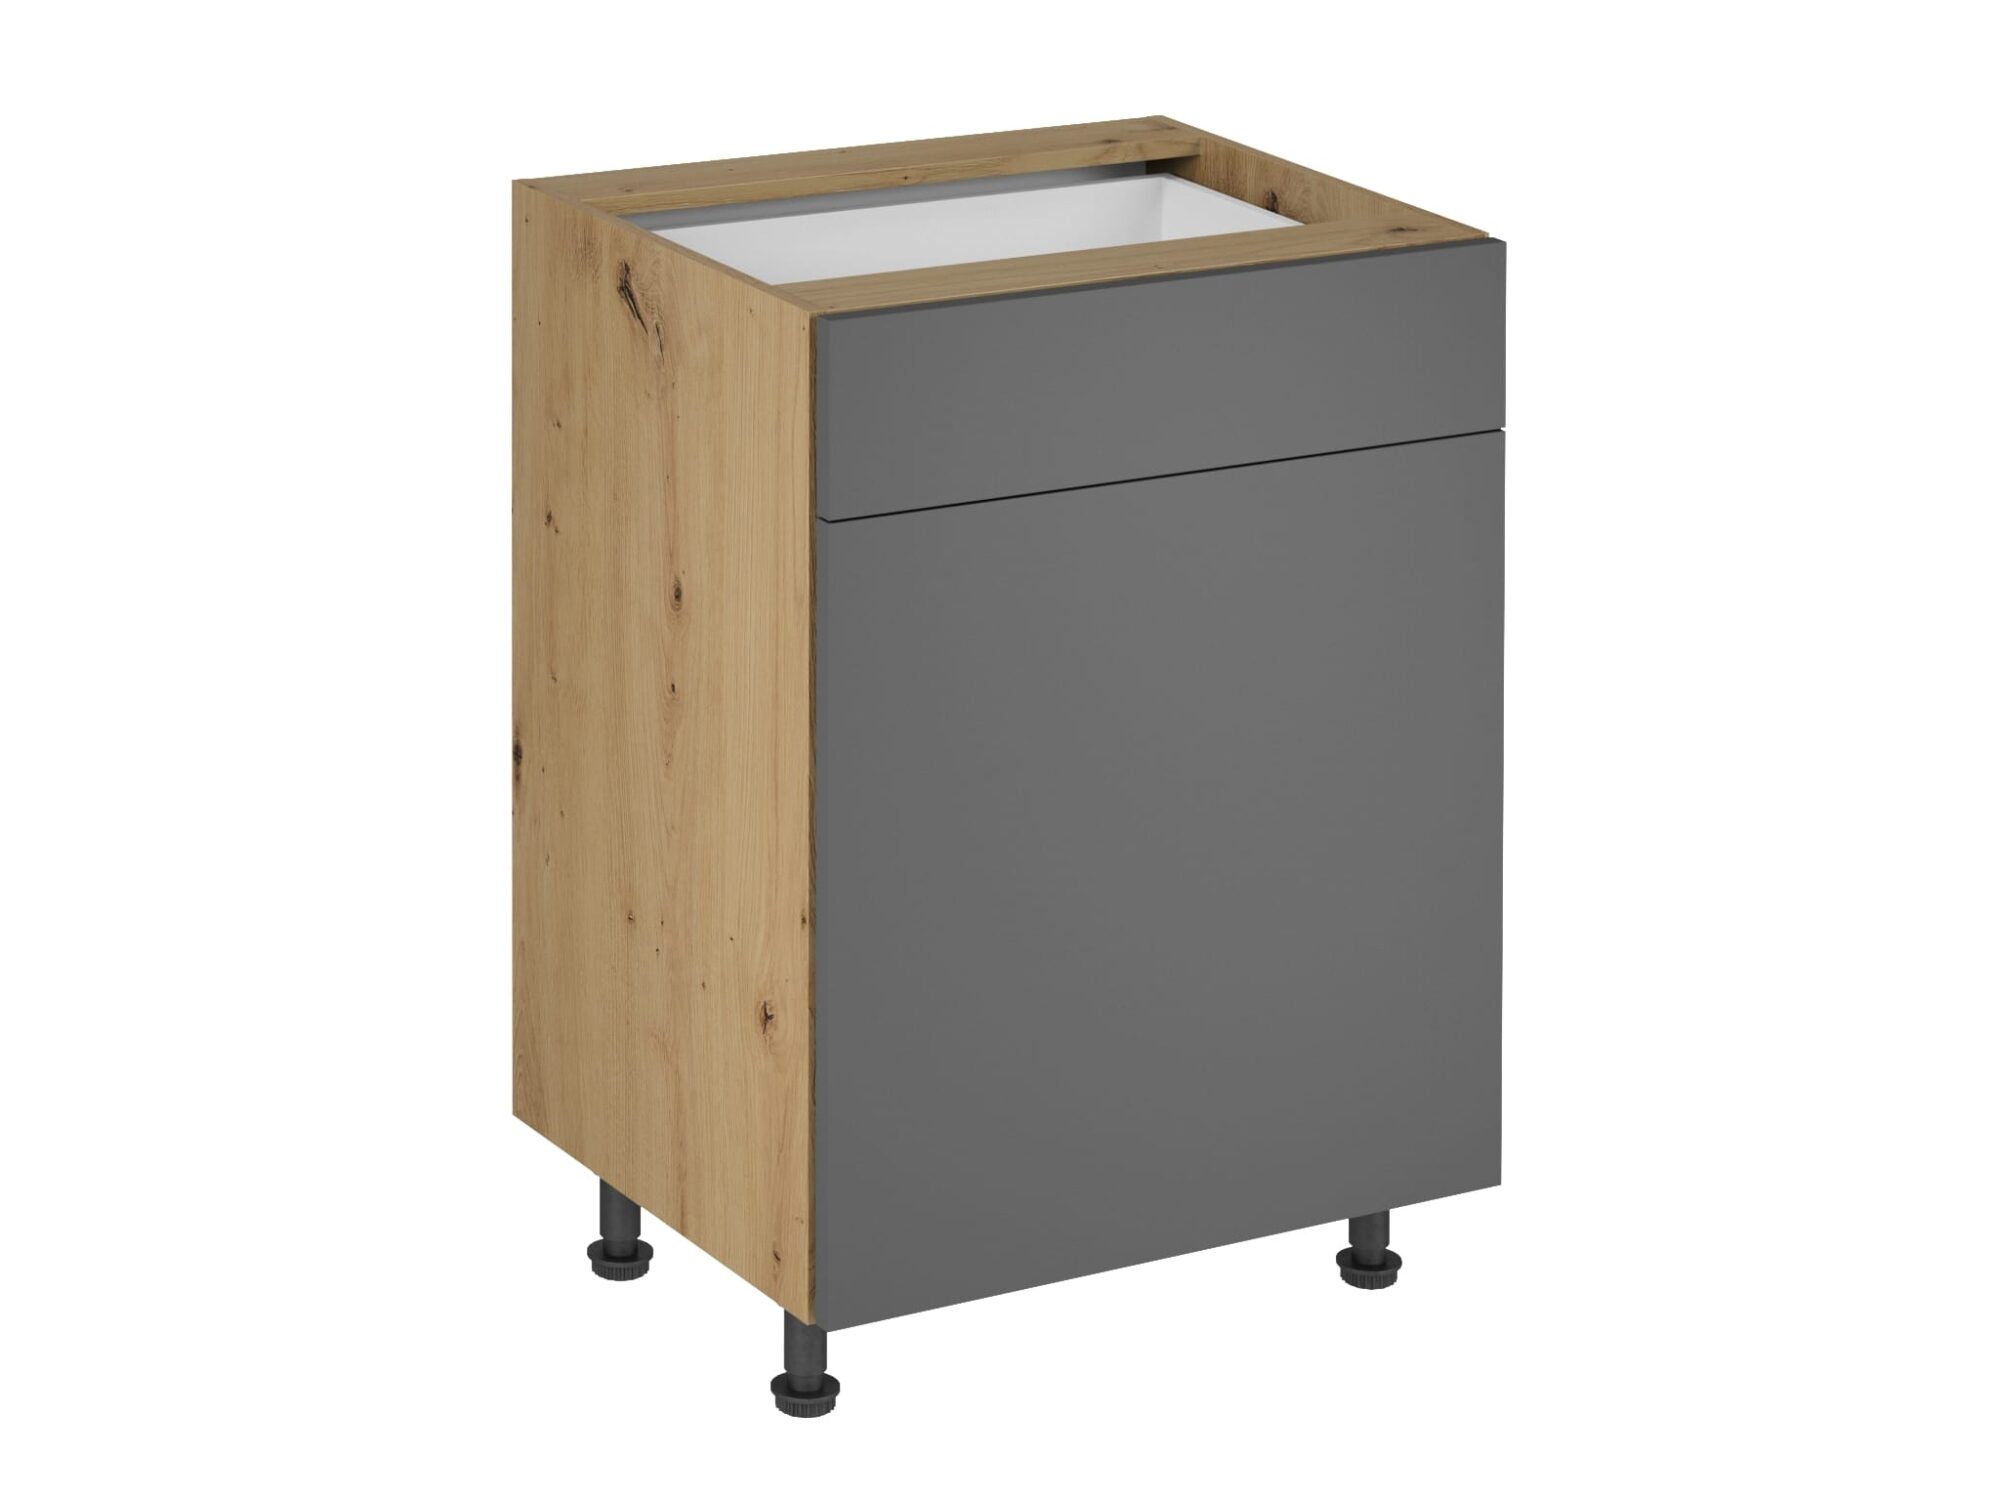 MODERN KITCHEN BASE UNIT WITH TWO STORAGE COMPARTMENTS IN GREY FOR KITCHENS D60S1 (P/L)